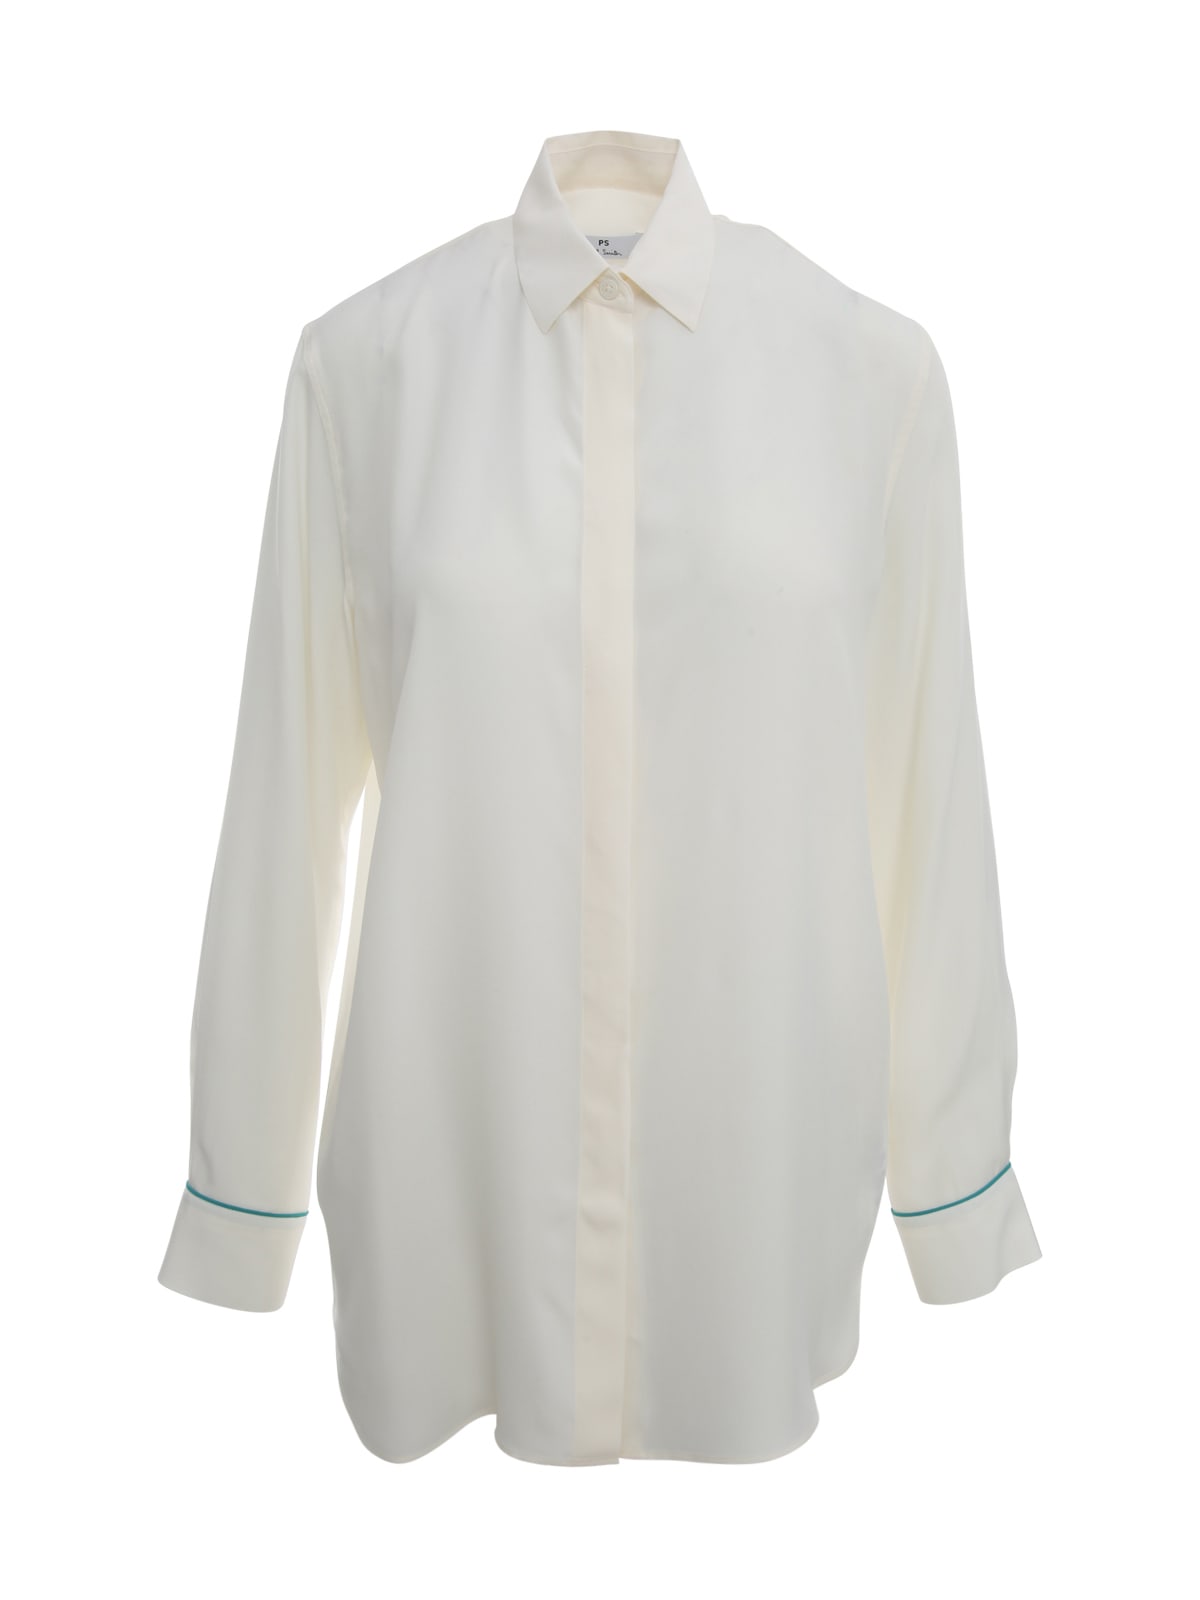 PS by Paul Smith Classic Shirt